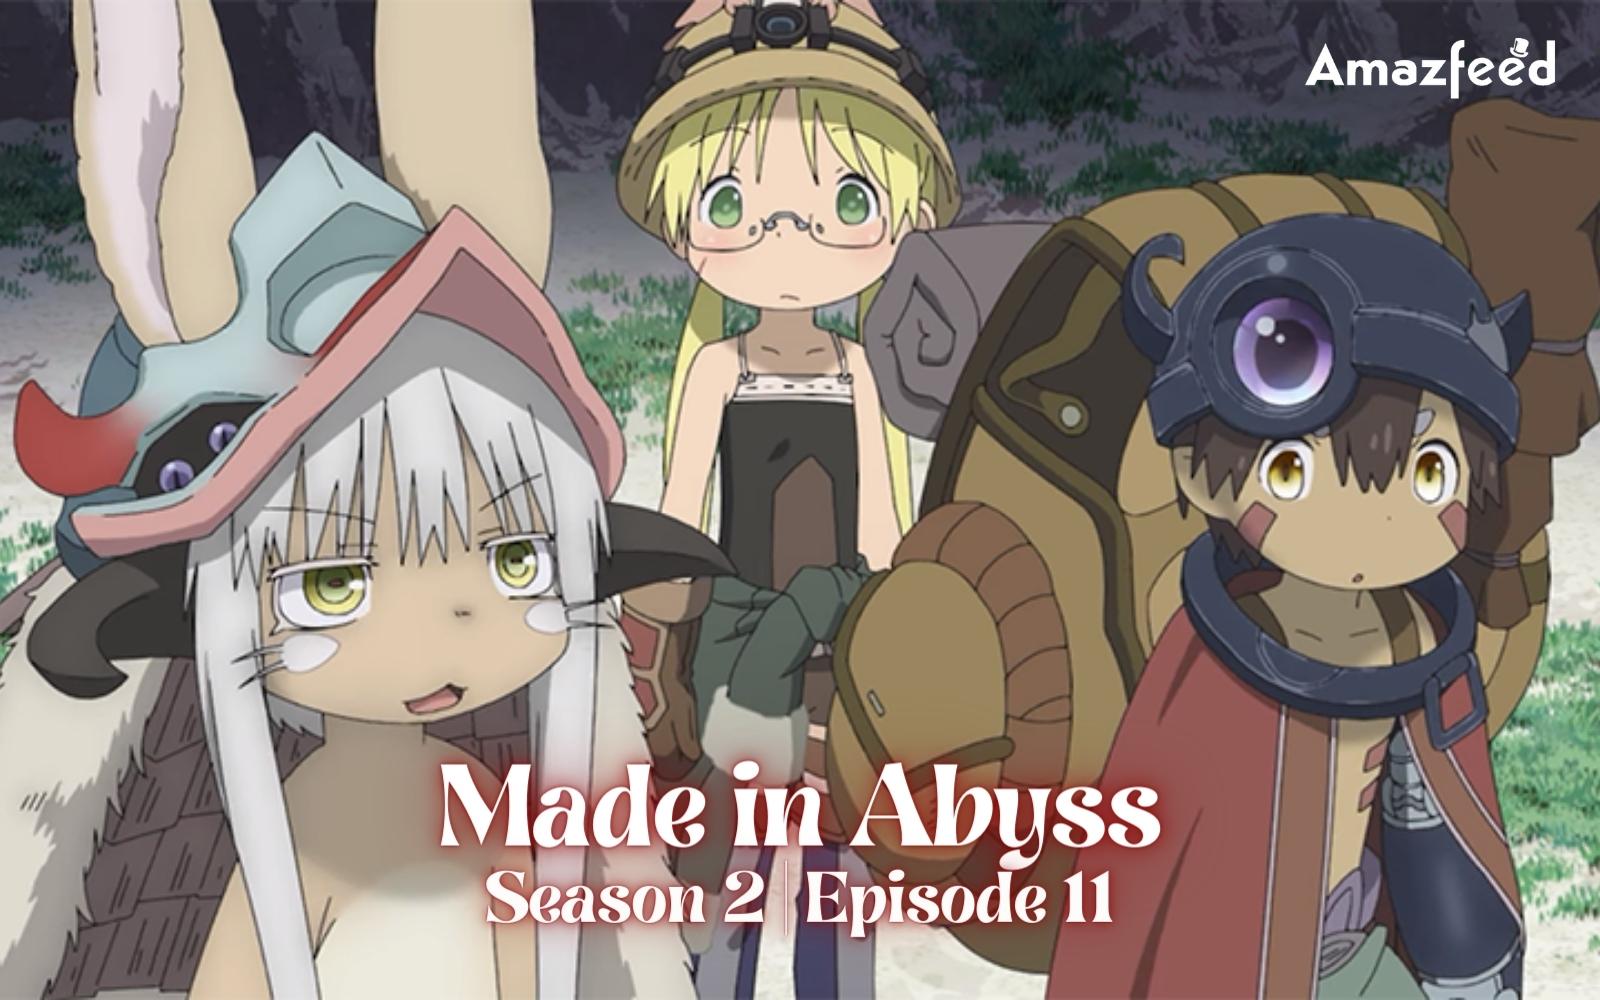 Made in Abyss Season 2 Episode 11 : Where to Watch, Countdown, Release Date, Recap, Cast & Spoiler